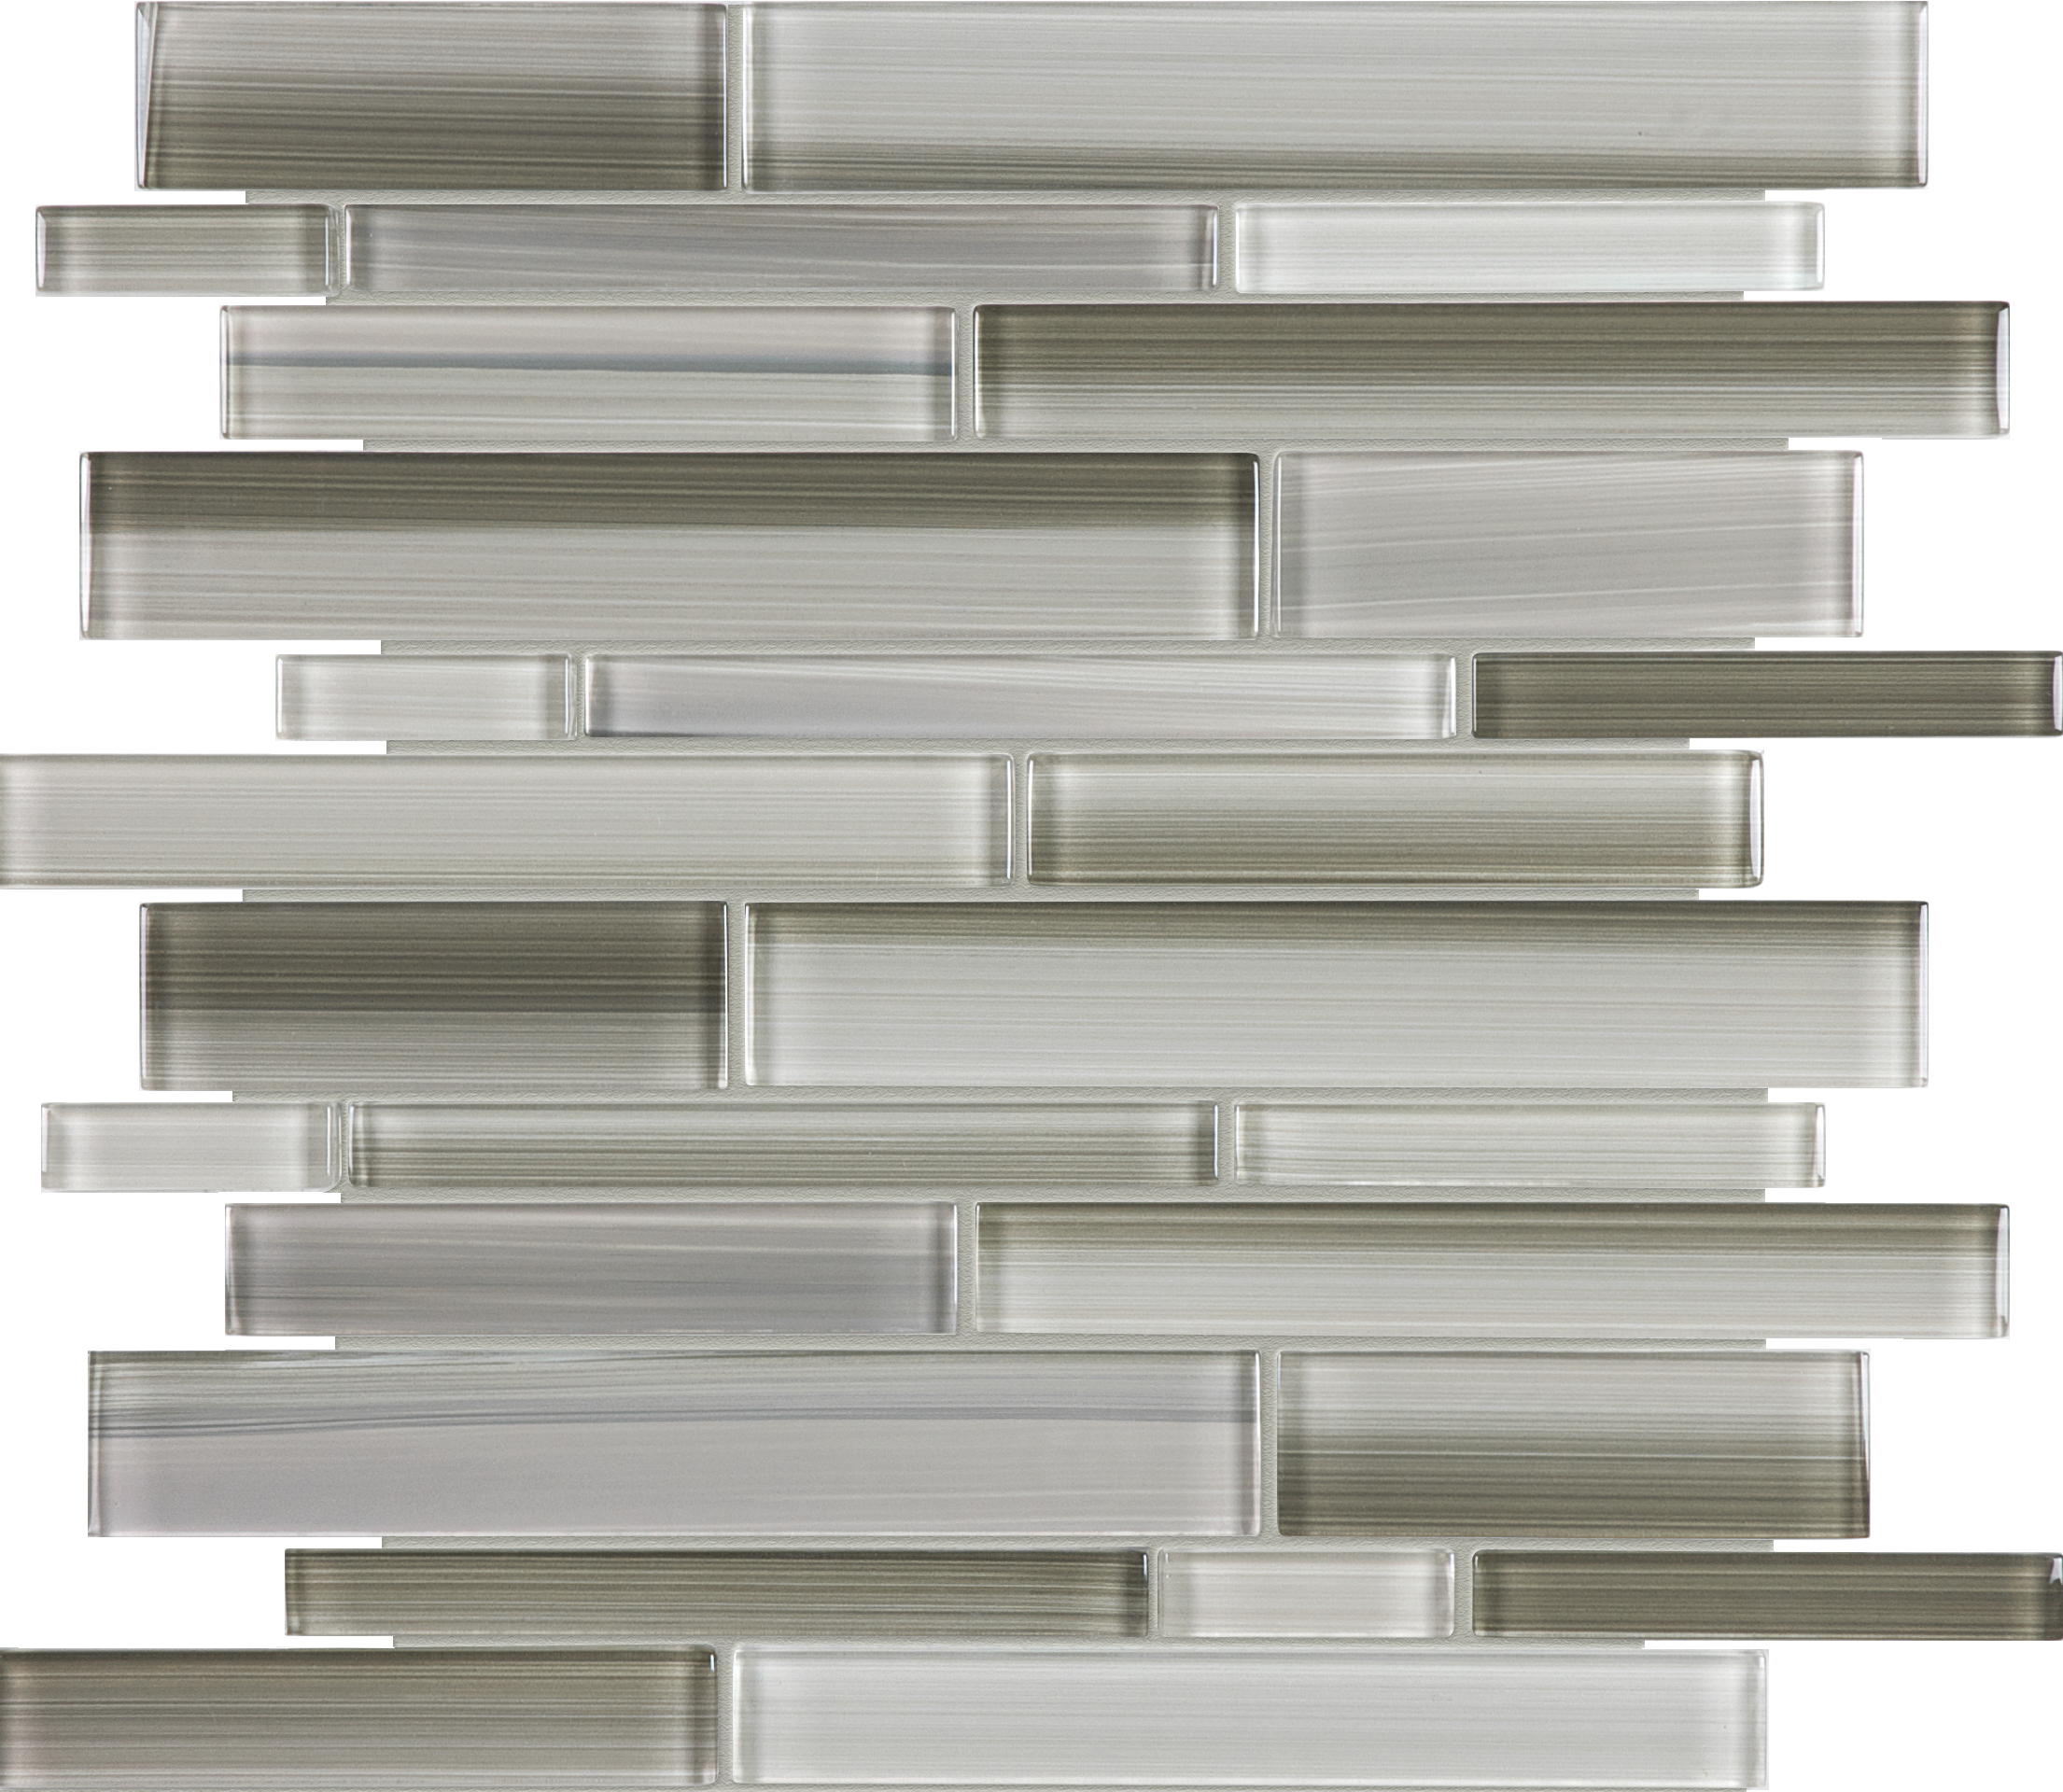 clay random strip pattern fused glass mosaic from fusion anatolia collection distributed by surface group international glossy finish rounded edge mesh shape